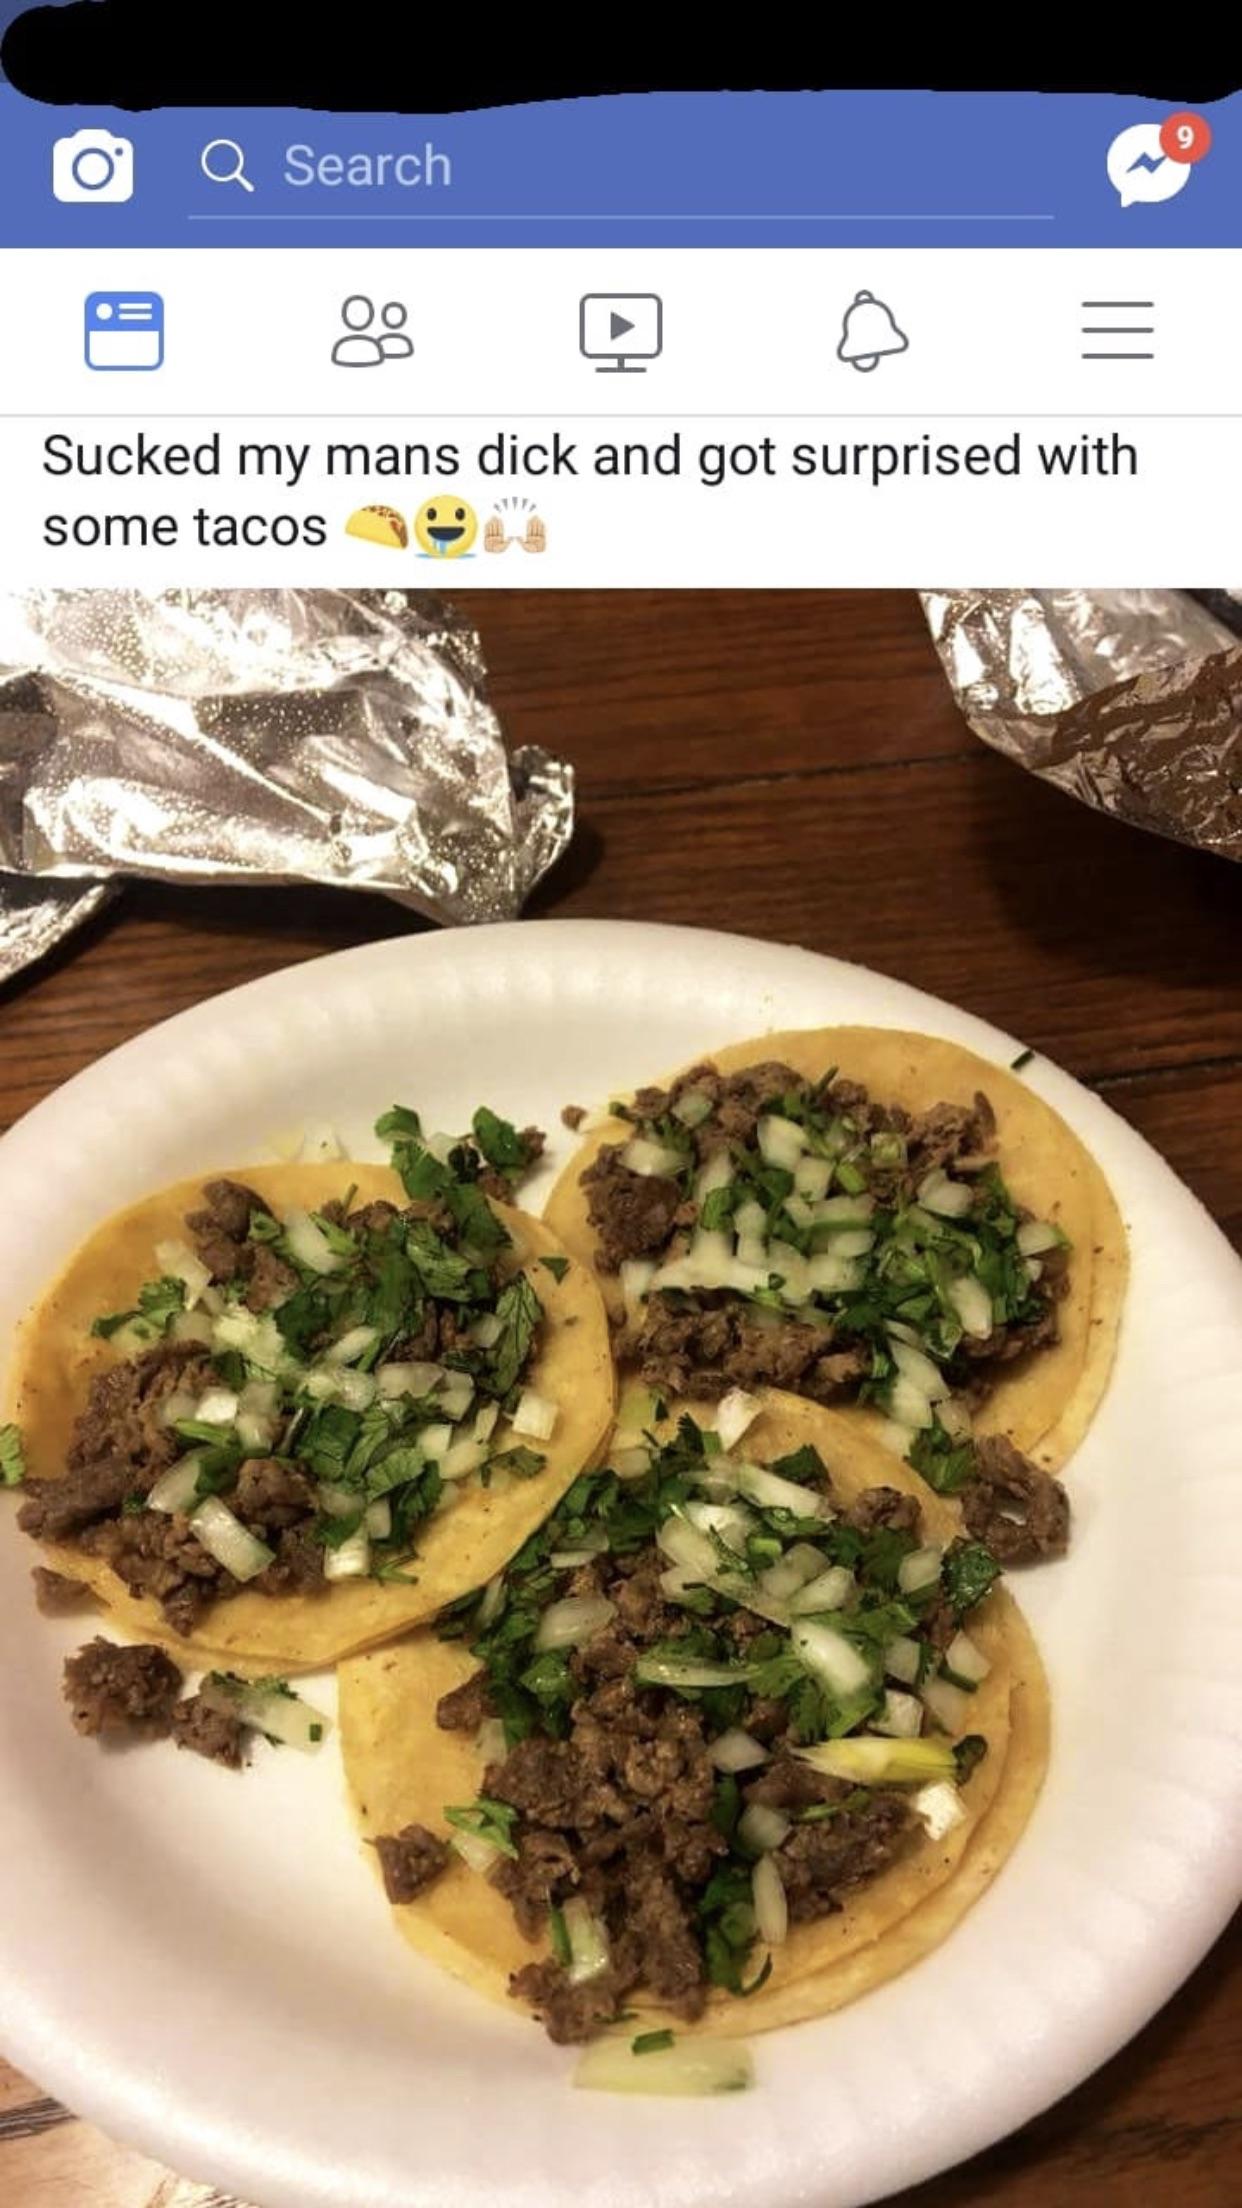 Sucked my mans dick and got surprised with some tacos